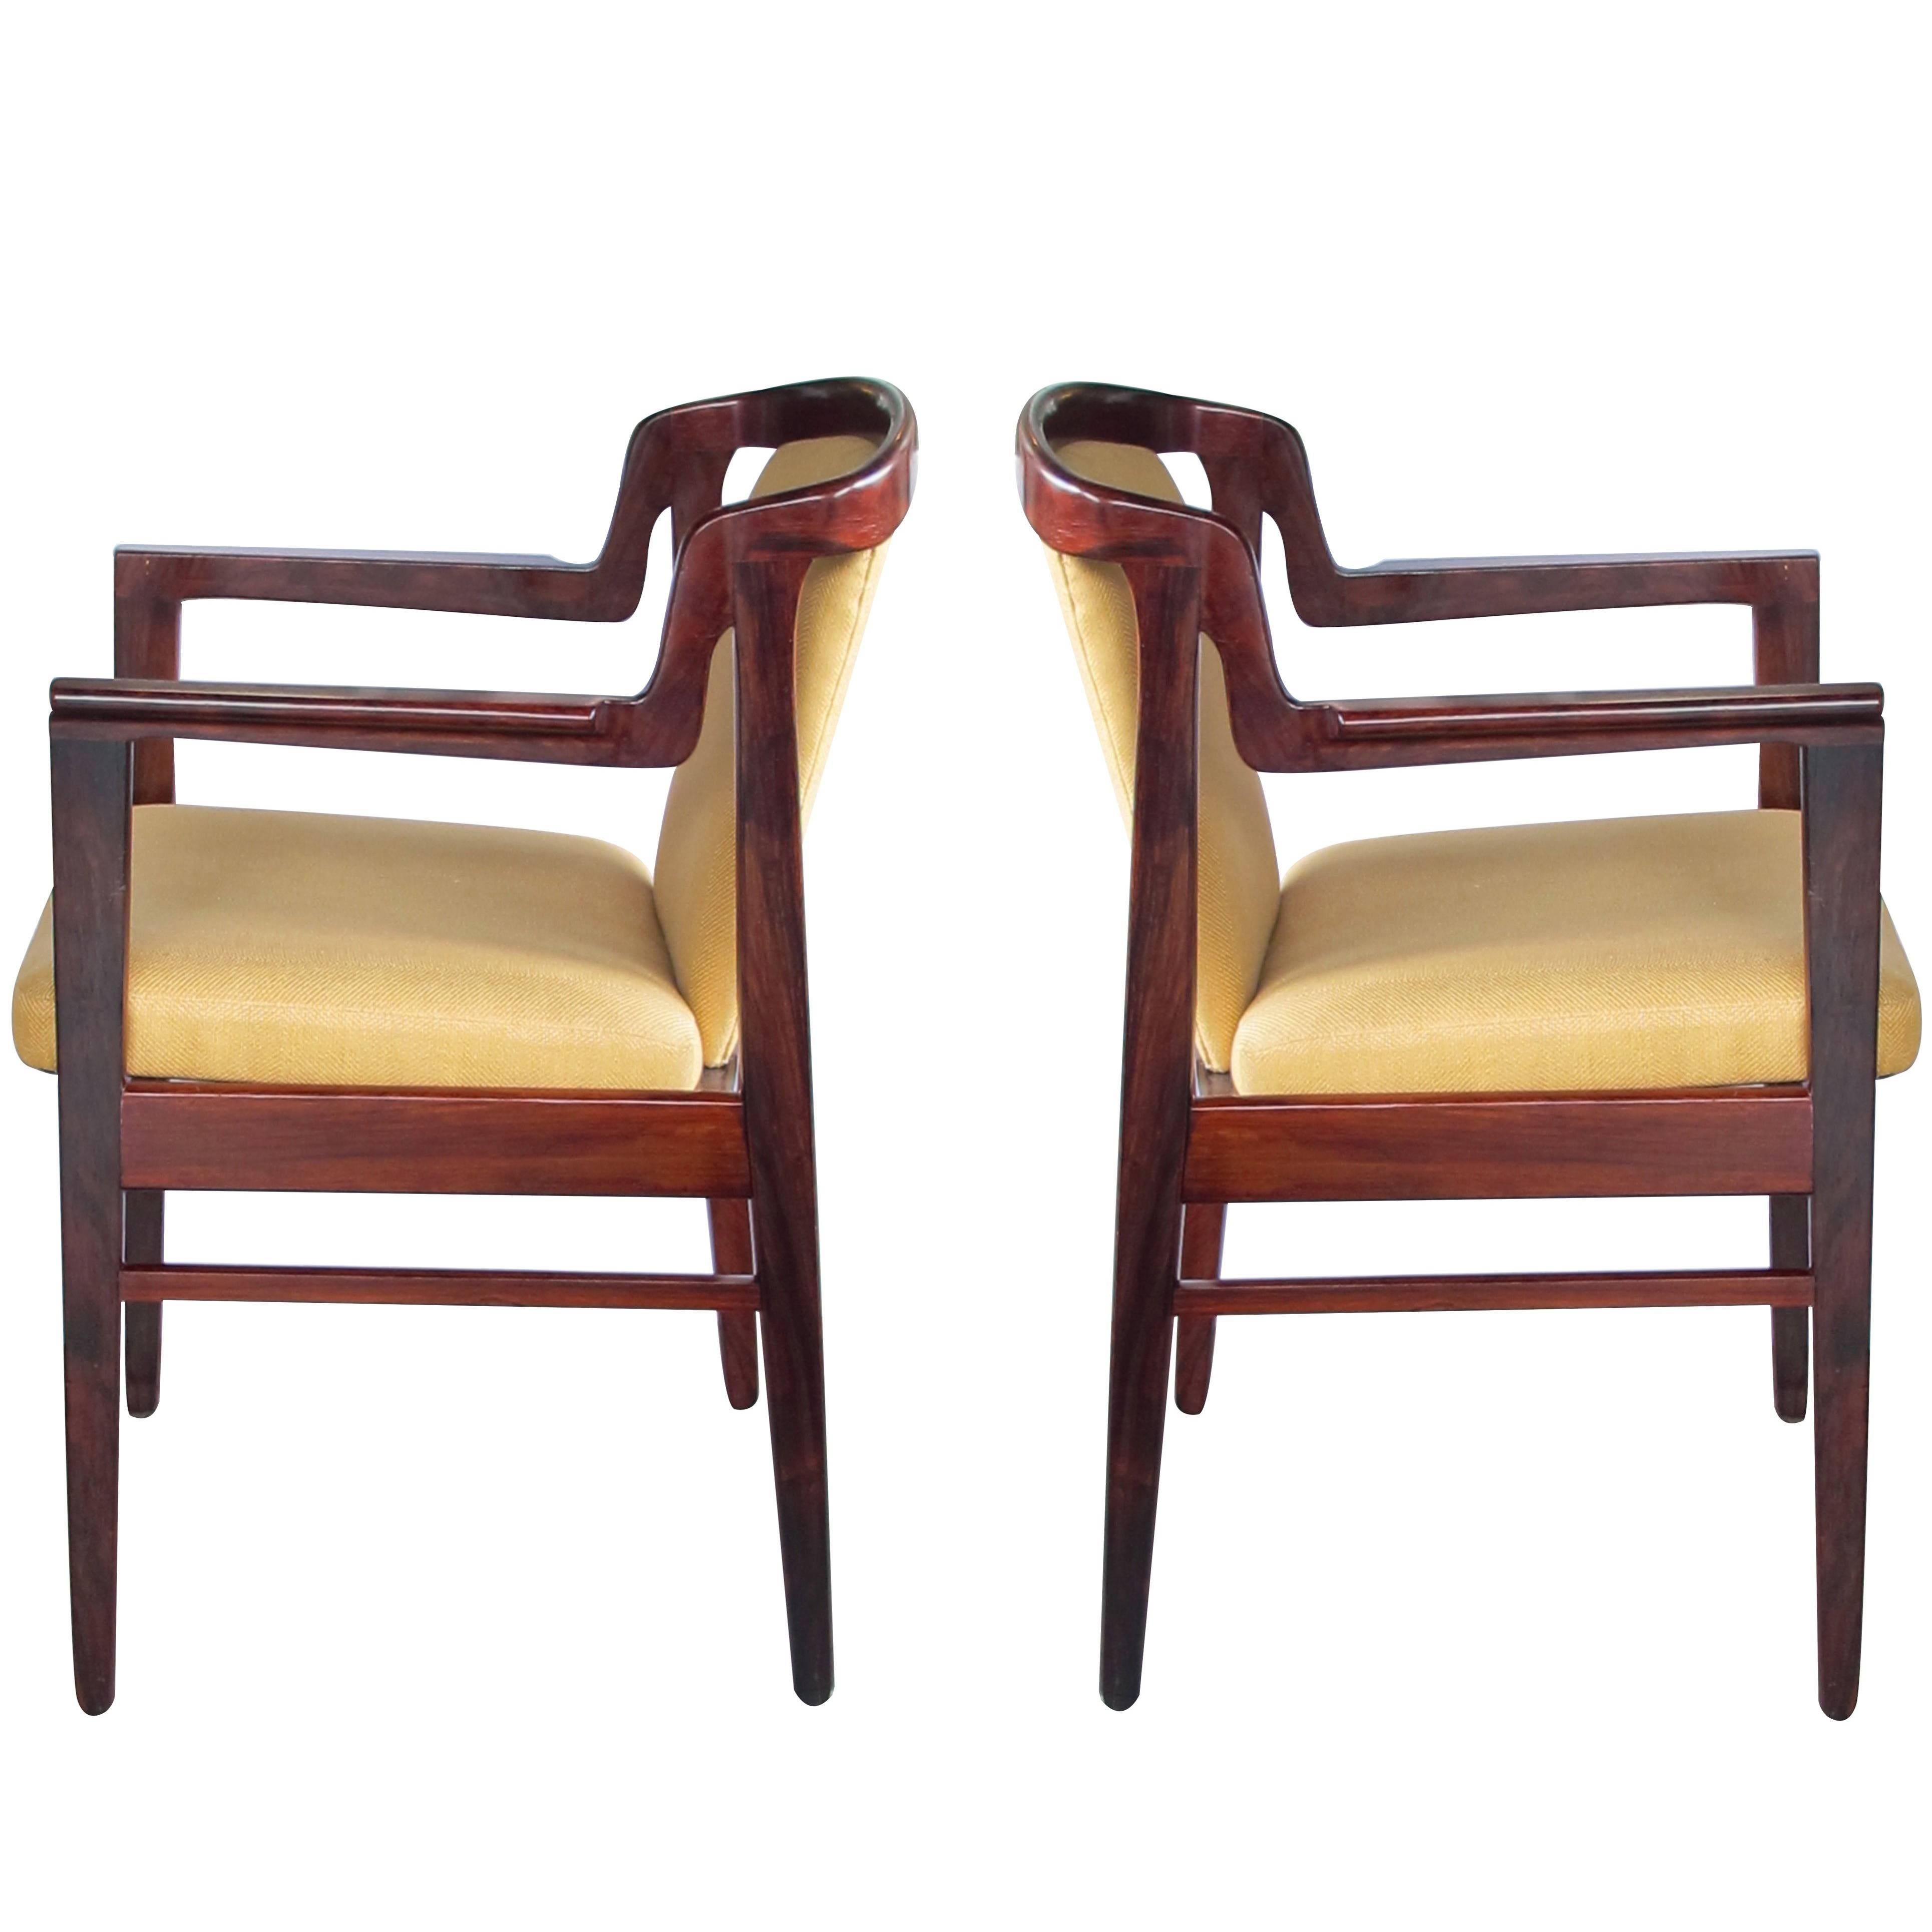 Pair of Danish Modern Rosewood Arm Chairs in the Manner of Kai Kristiansen